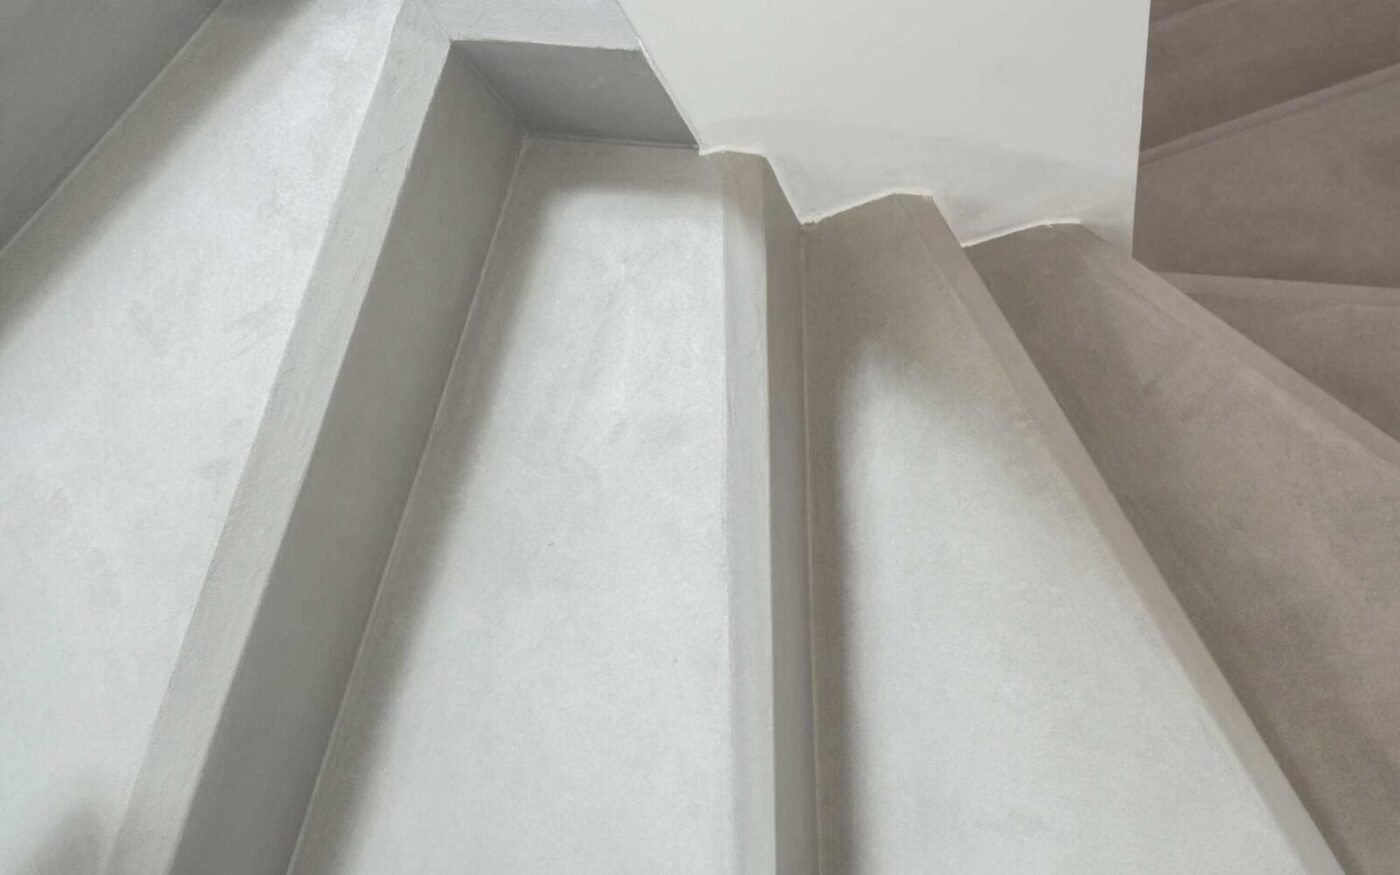 A top-down view of a modern staircase with light gray concrete steps and sharp, angled edges. The image captures the corner of the stairwell where the steps change direction, demonstrating clean lines and minimalist design.